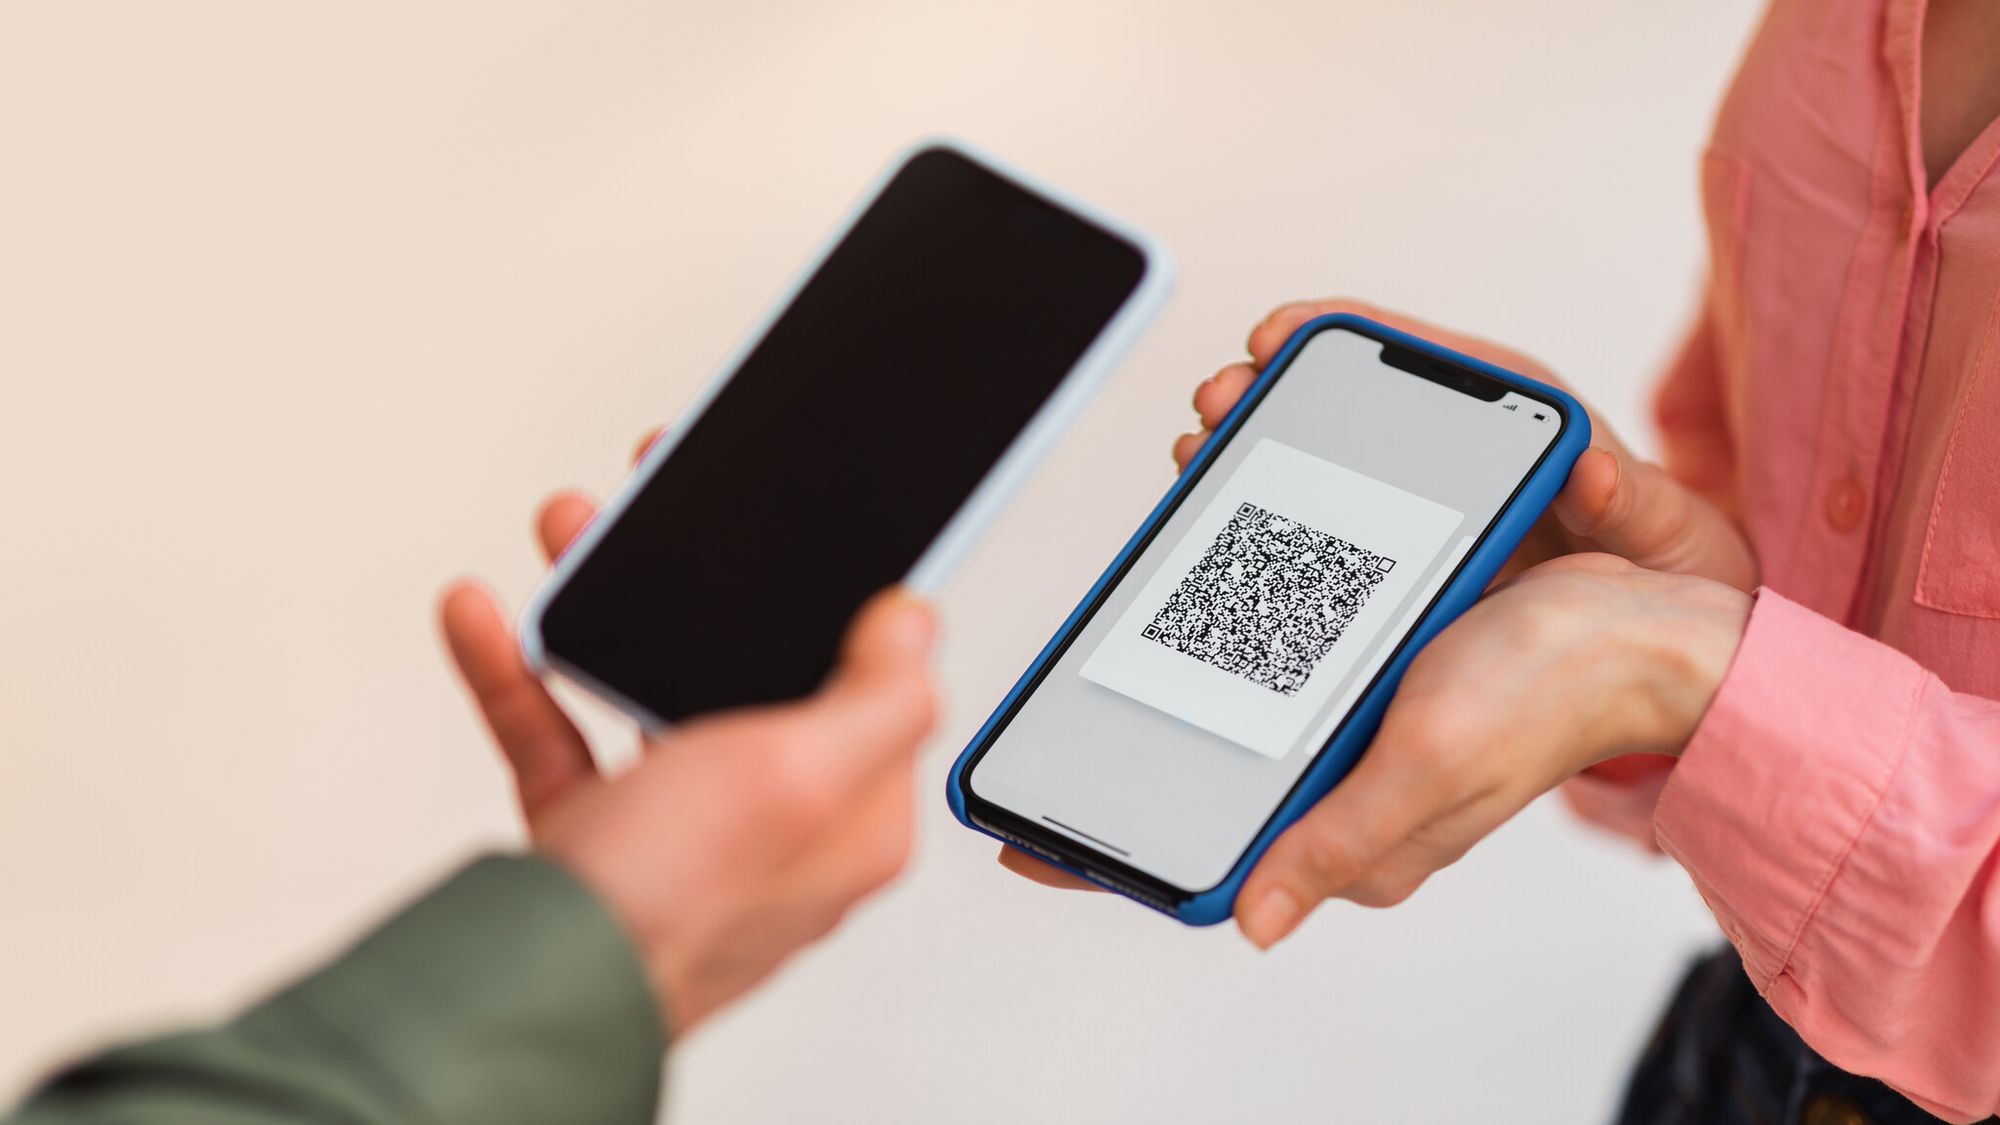 a hand scanning a QR code from another phone